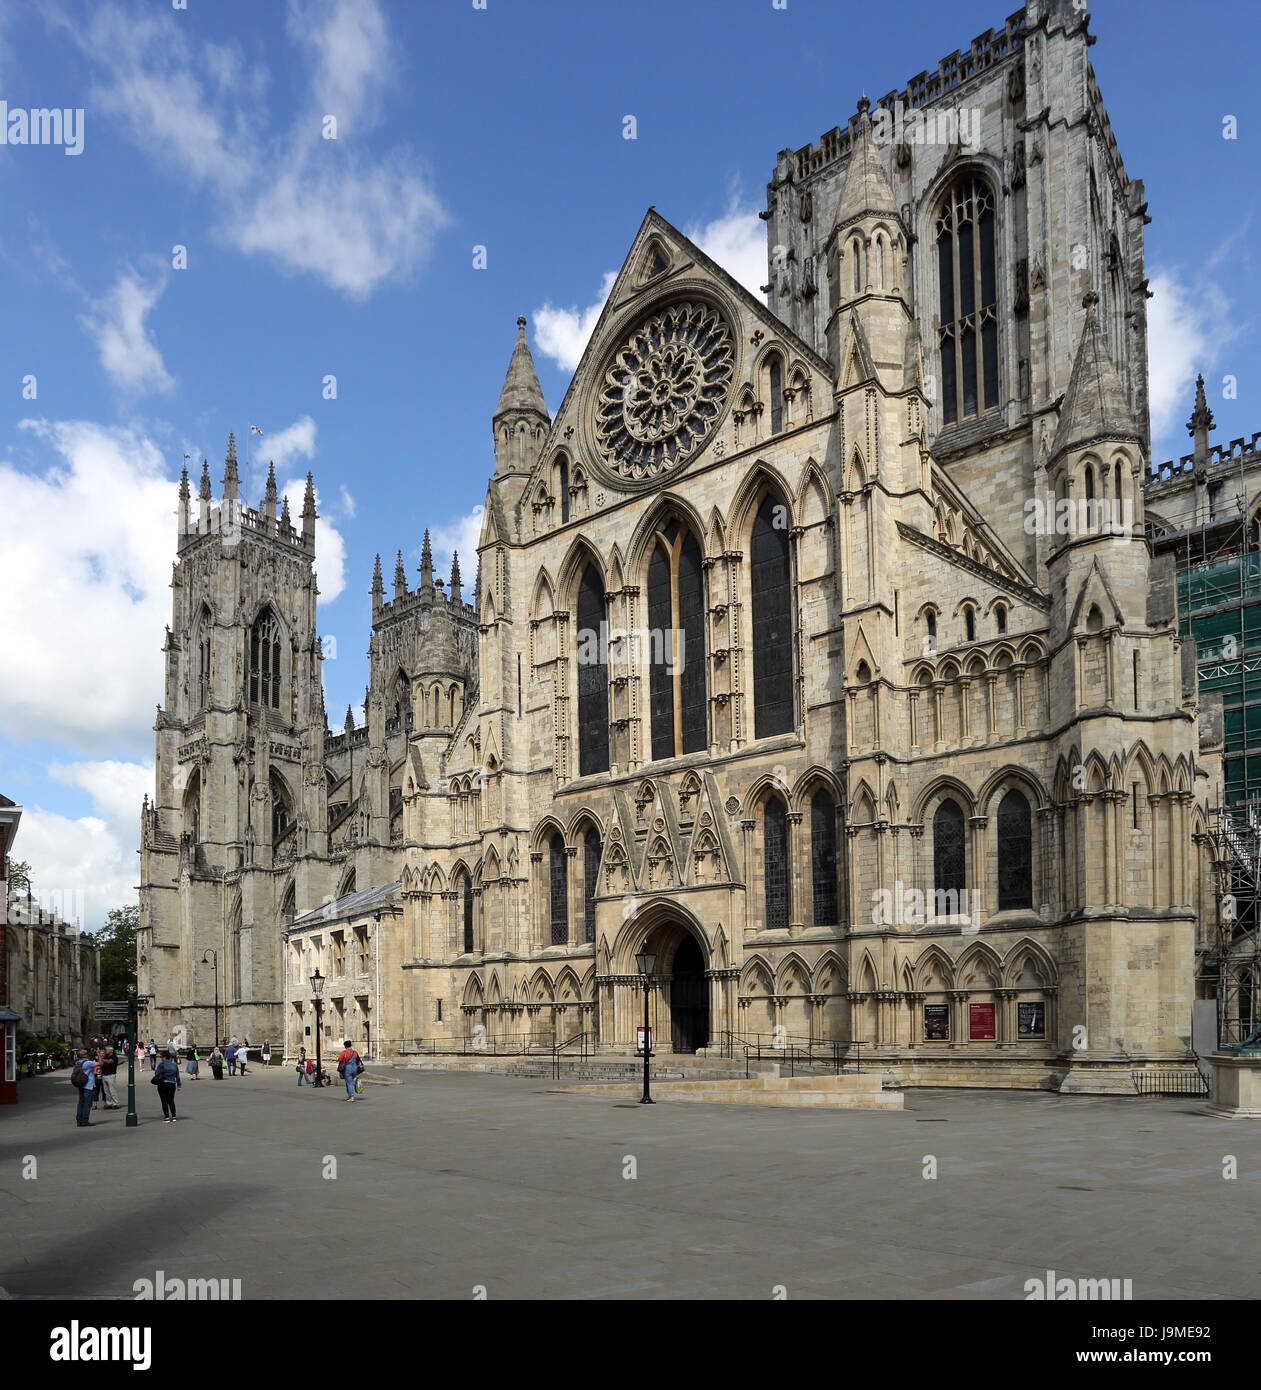 York Minster in the UK, viewed from the front. Stock Photo